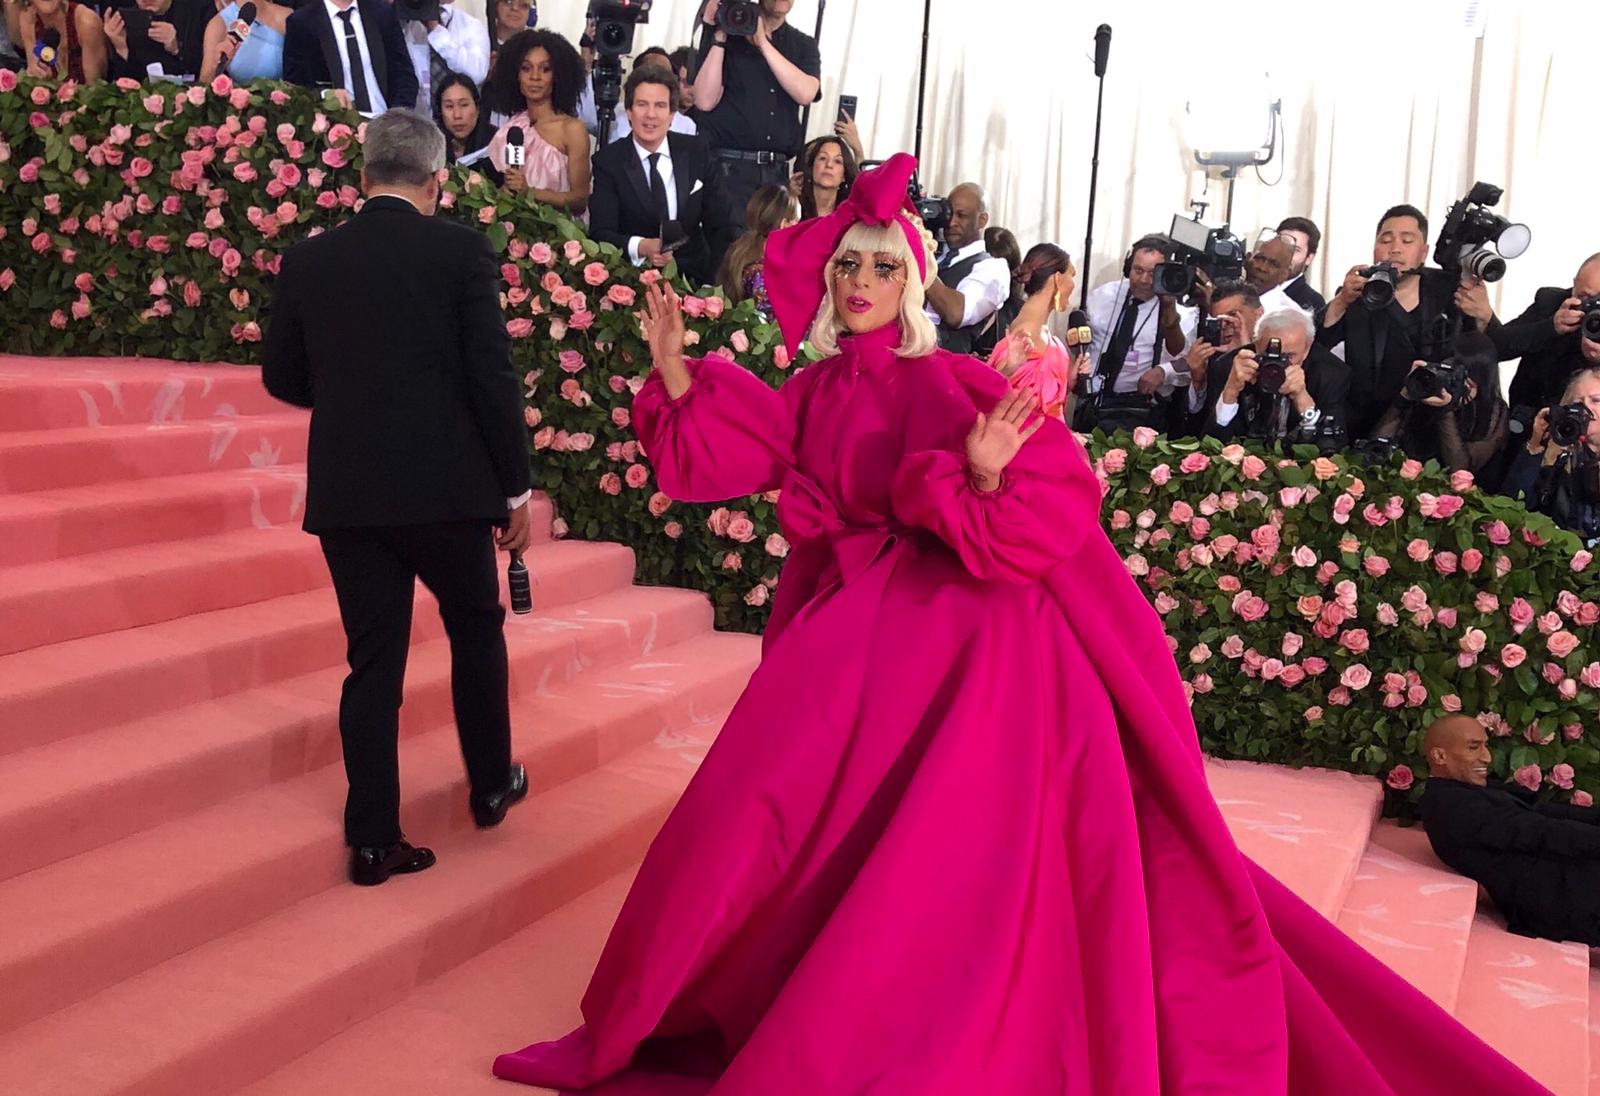 Hollywood's prominent A-listers miss this year's biggest fashion night, Met Gala